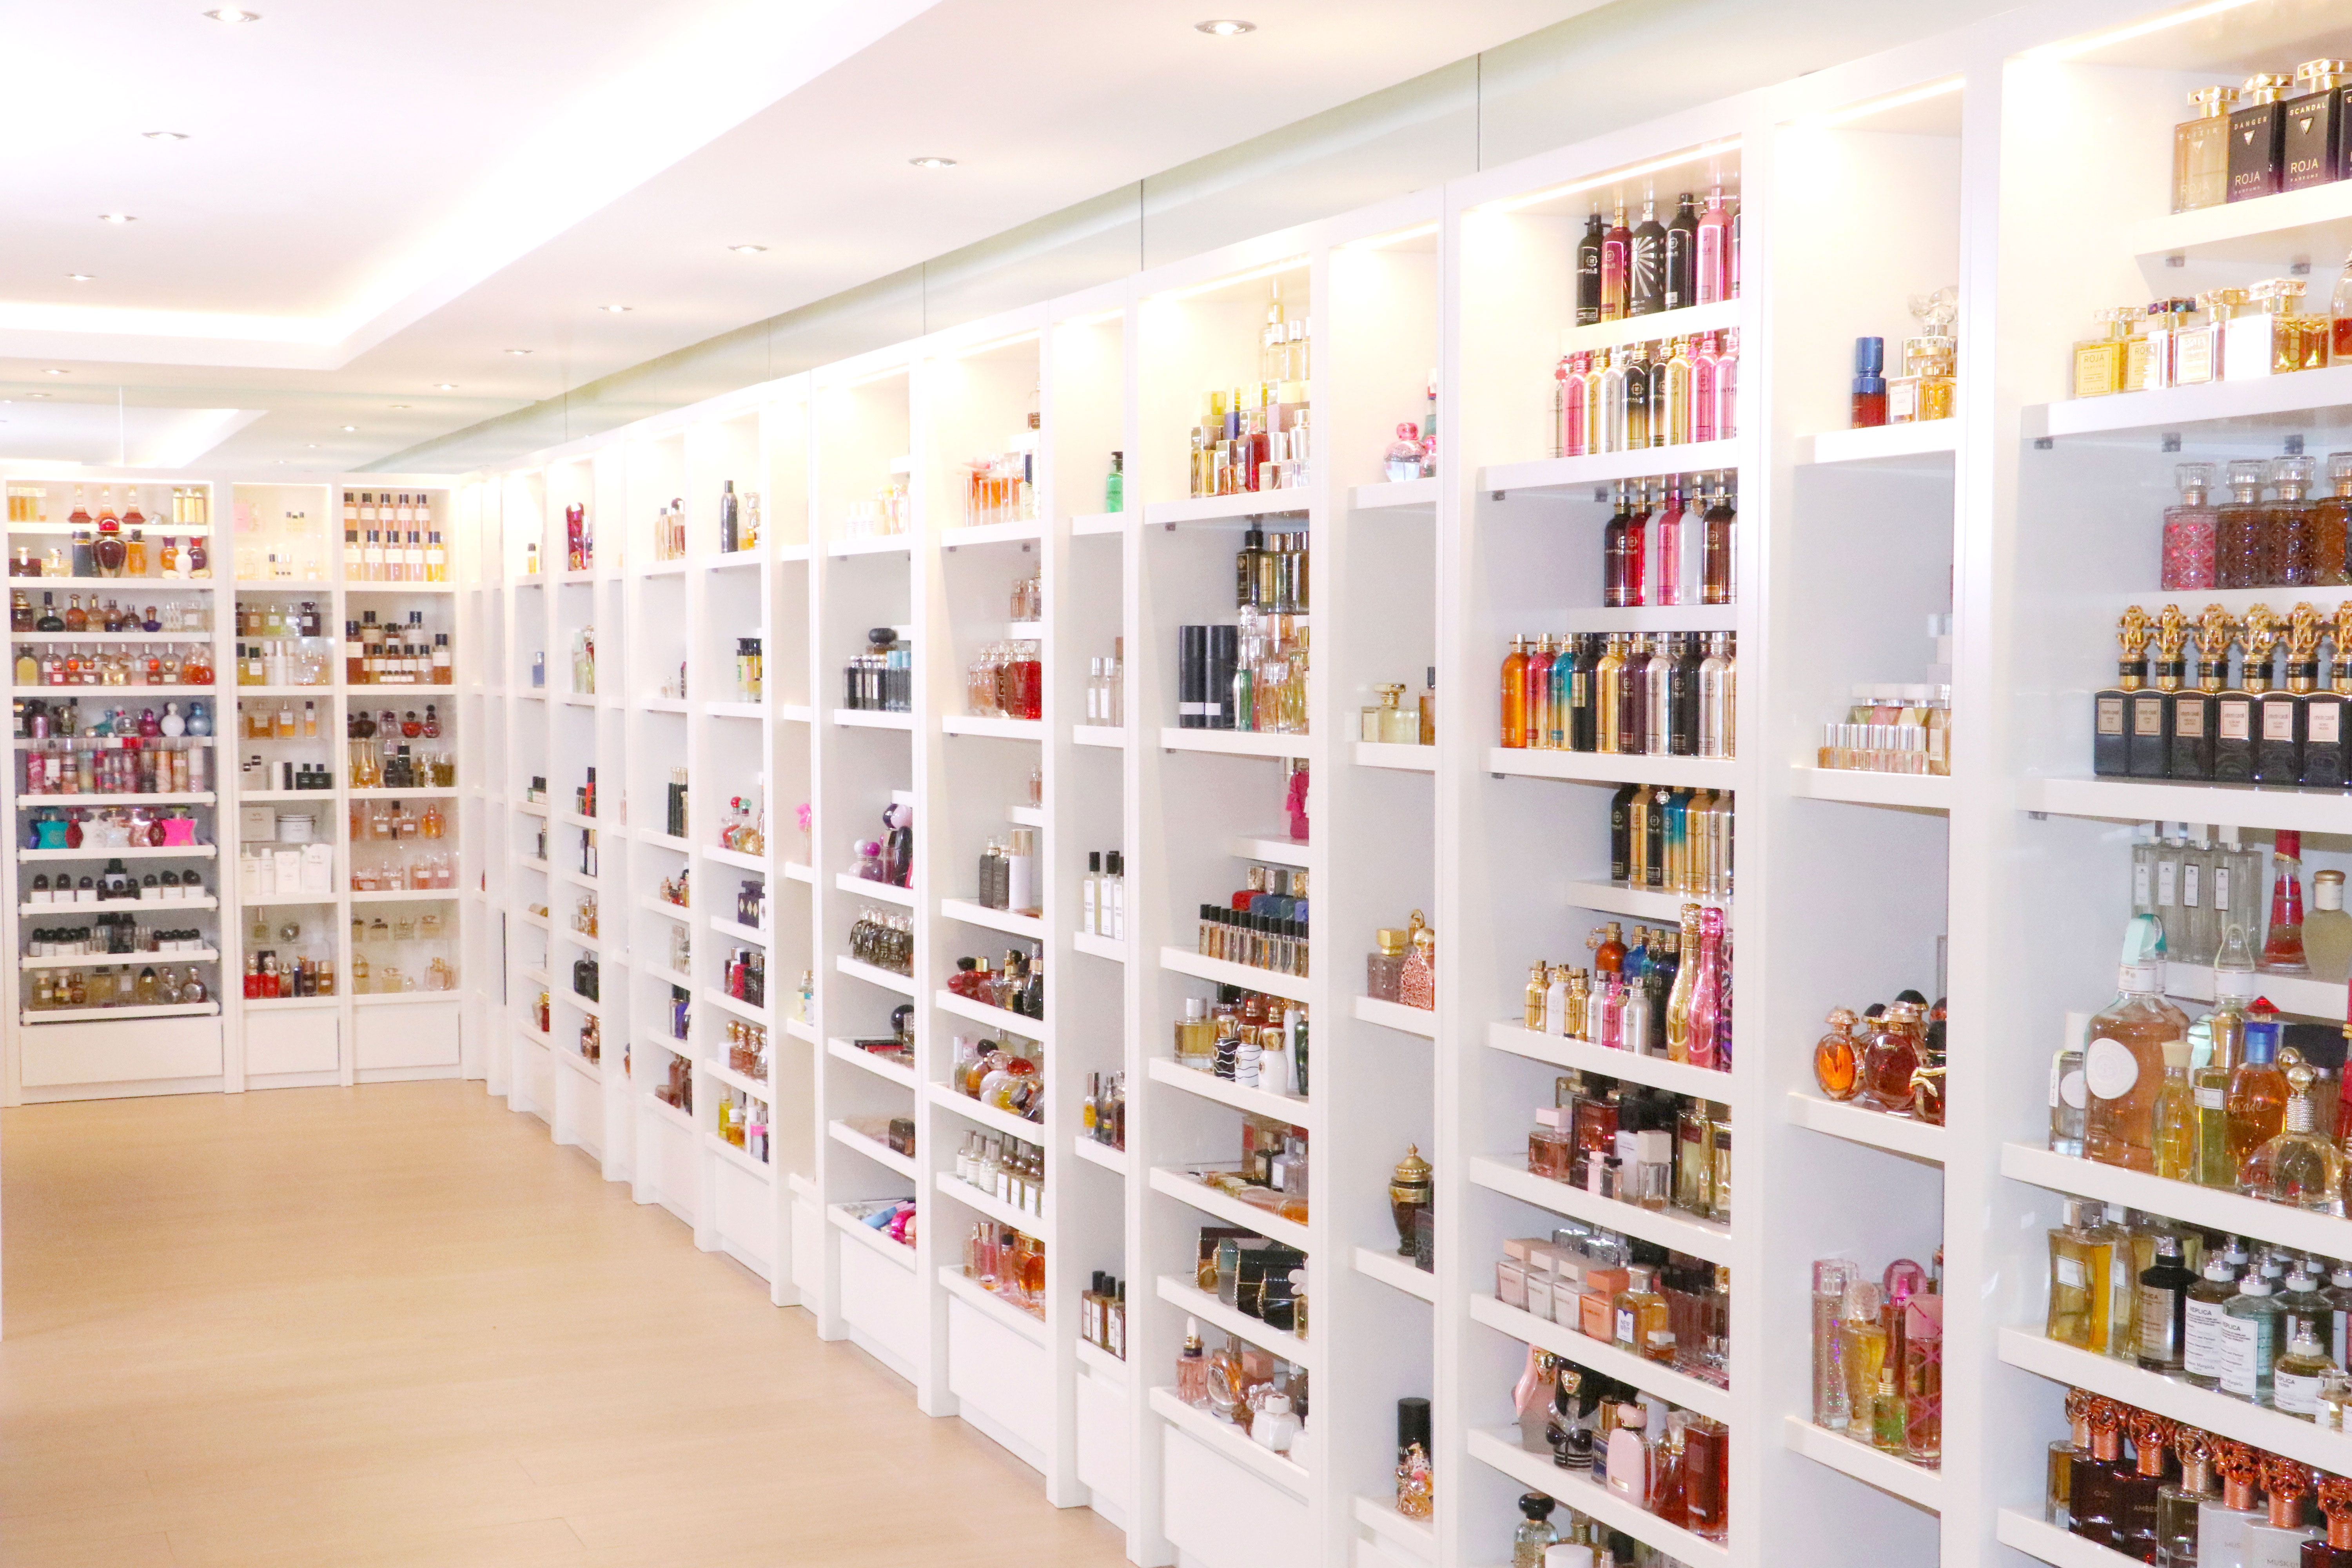 There's a Closet in Dubai With 4,000 Perfumes Inside